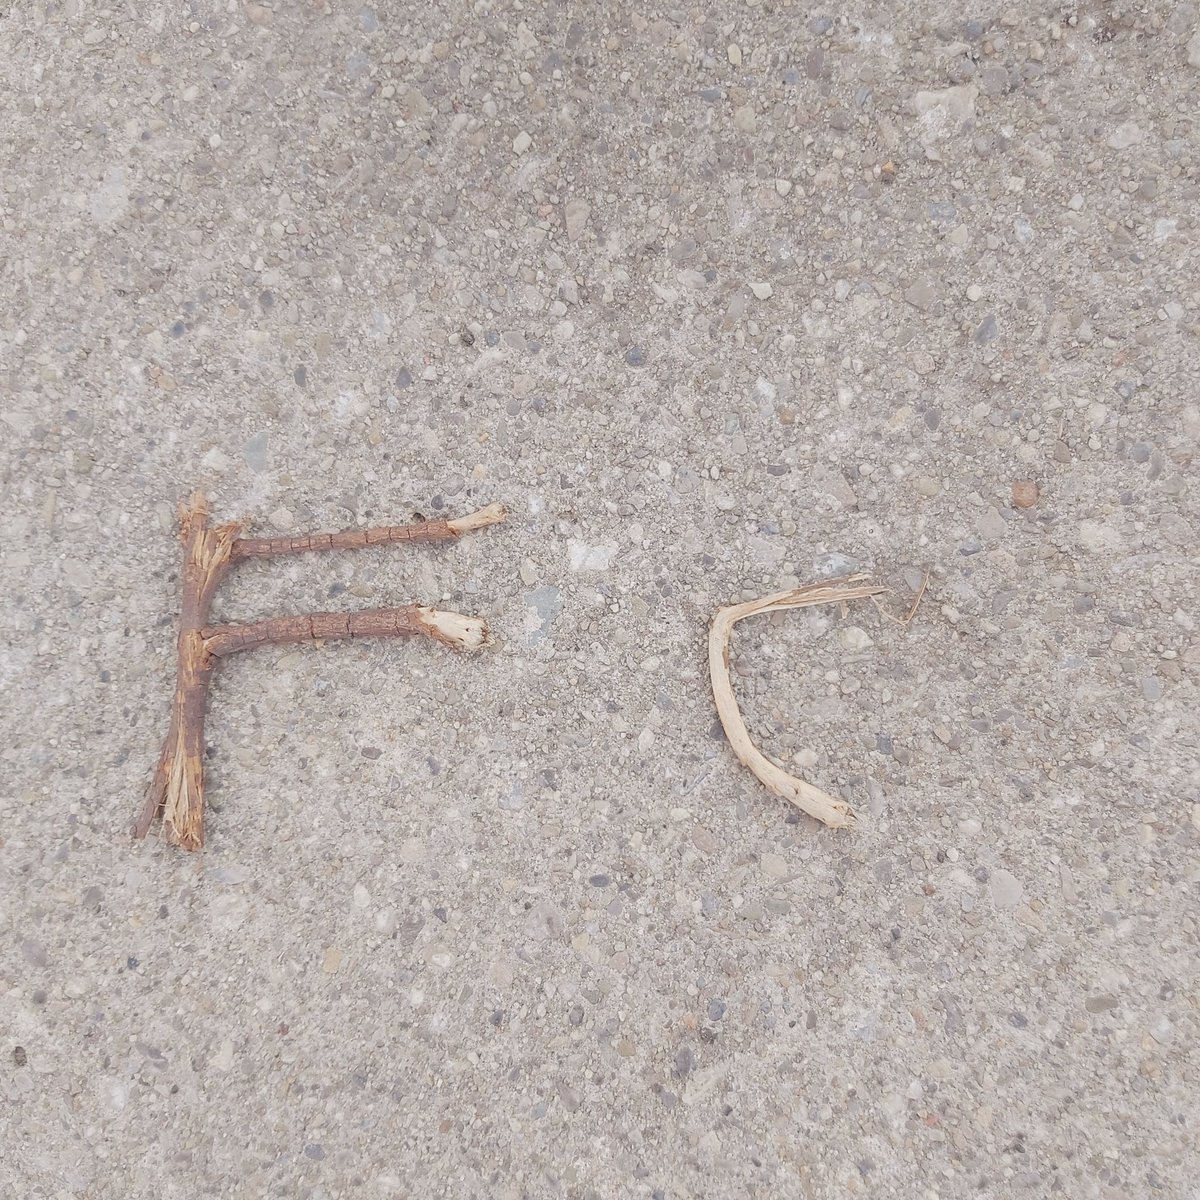 Just found these twigs on the ground. The universe must be trying to tell me something, or maybe it's just the gummies. U decide. 😆